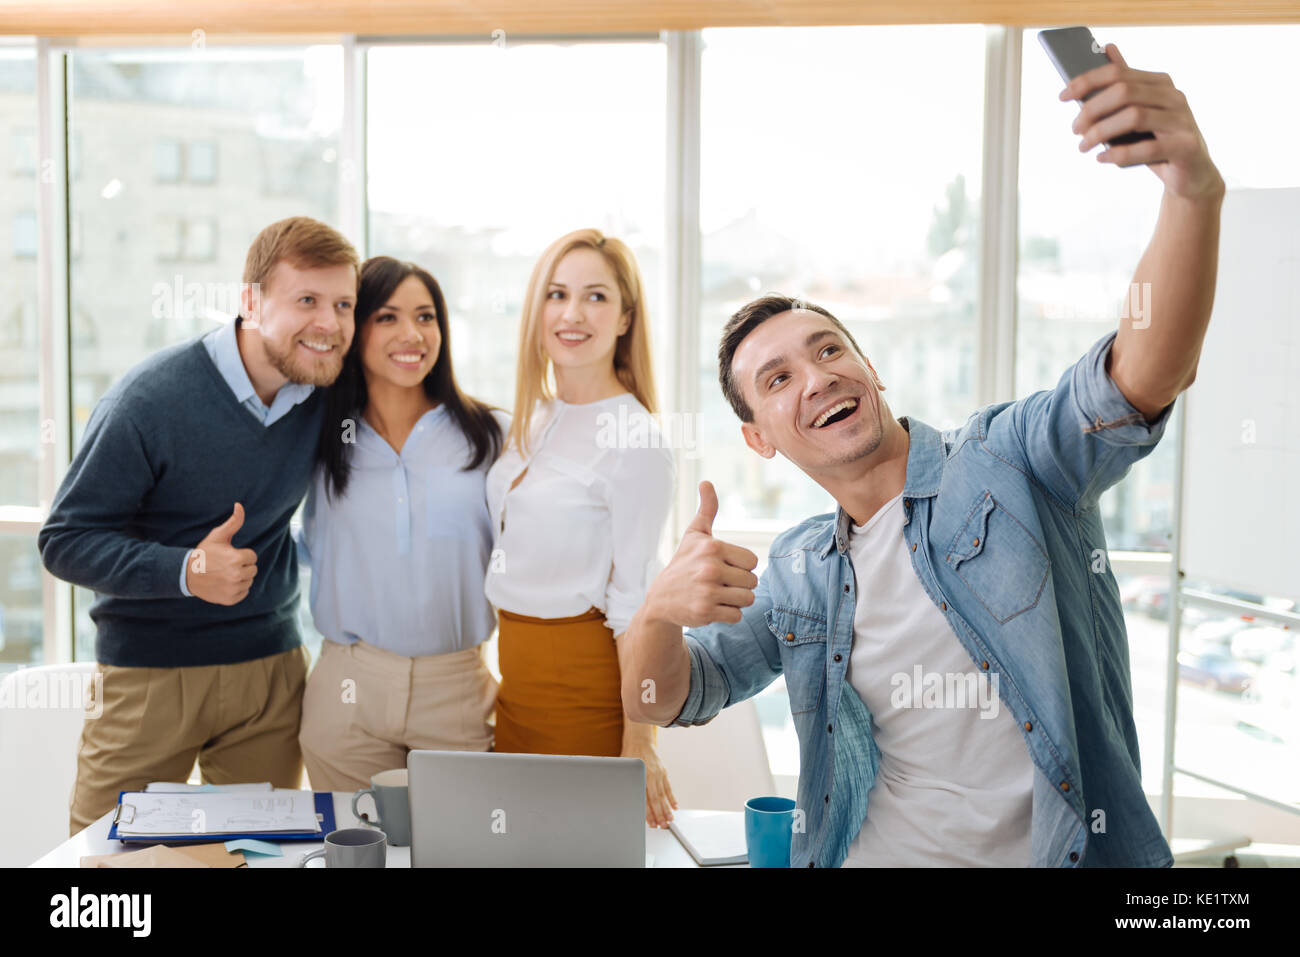 Delighted people posing on selfie camera Stock Photo